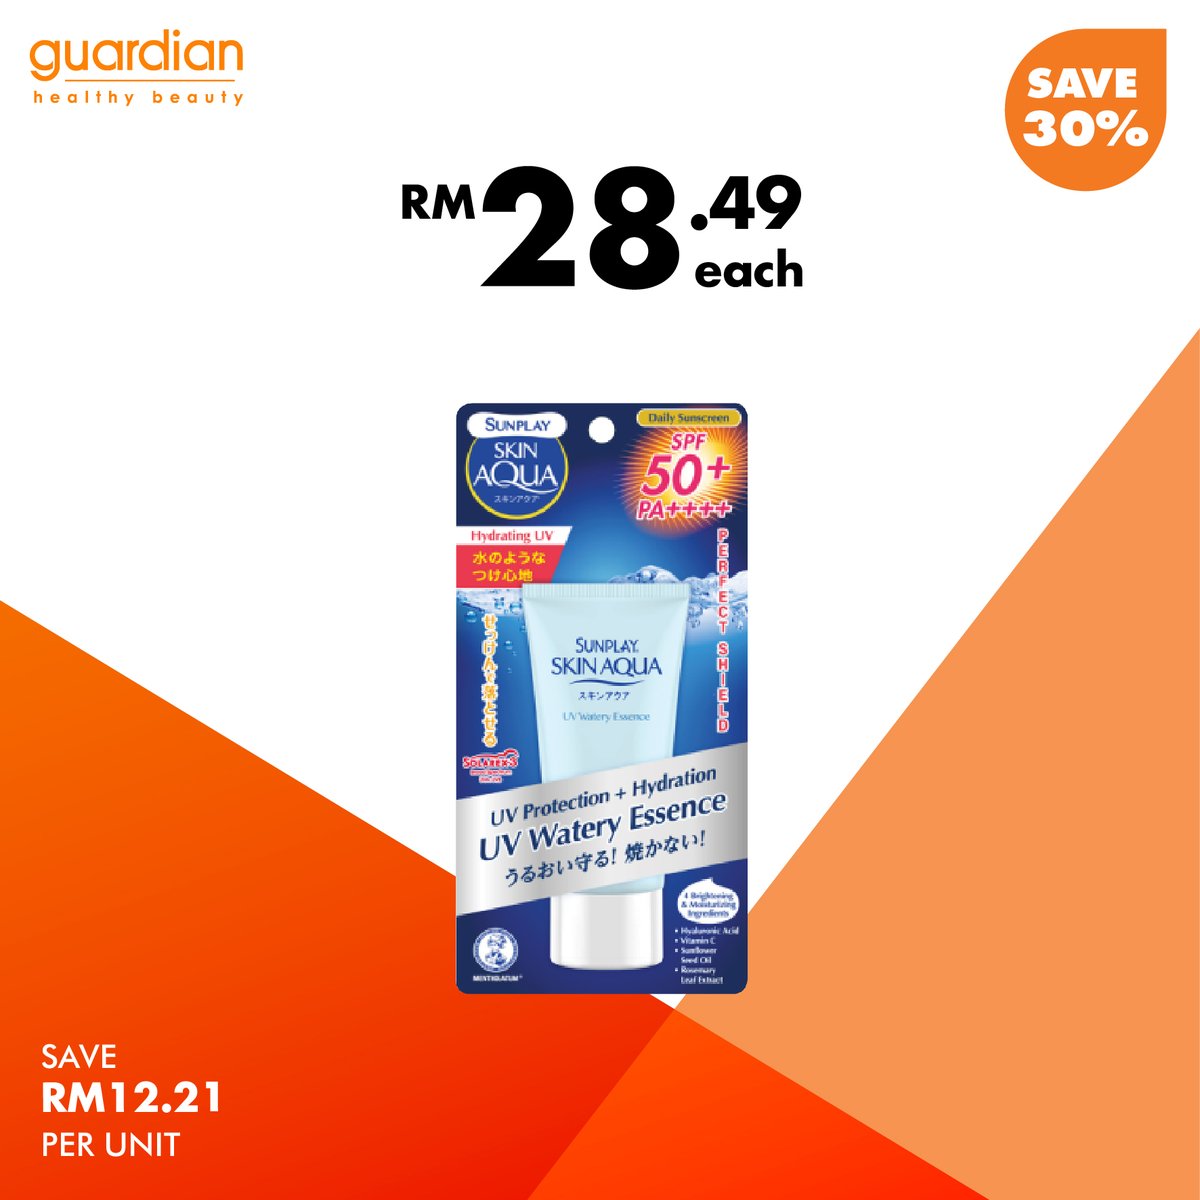 *Limited to 3 units, per item, per receipt. Only available at selected stores. While stocks last. Terms apply. #GuardianMY  #JomGuardian  #GuardianOnline  #GuardianSquad  #GuardianPromo  #StayAtHome  